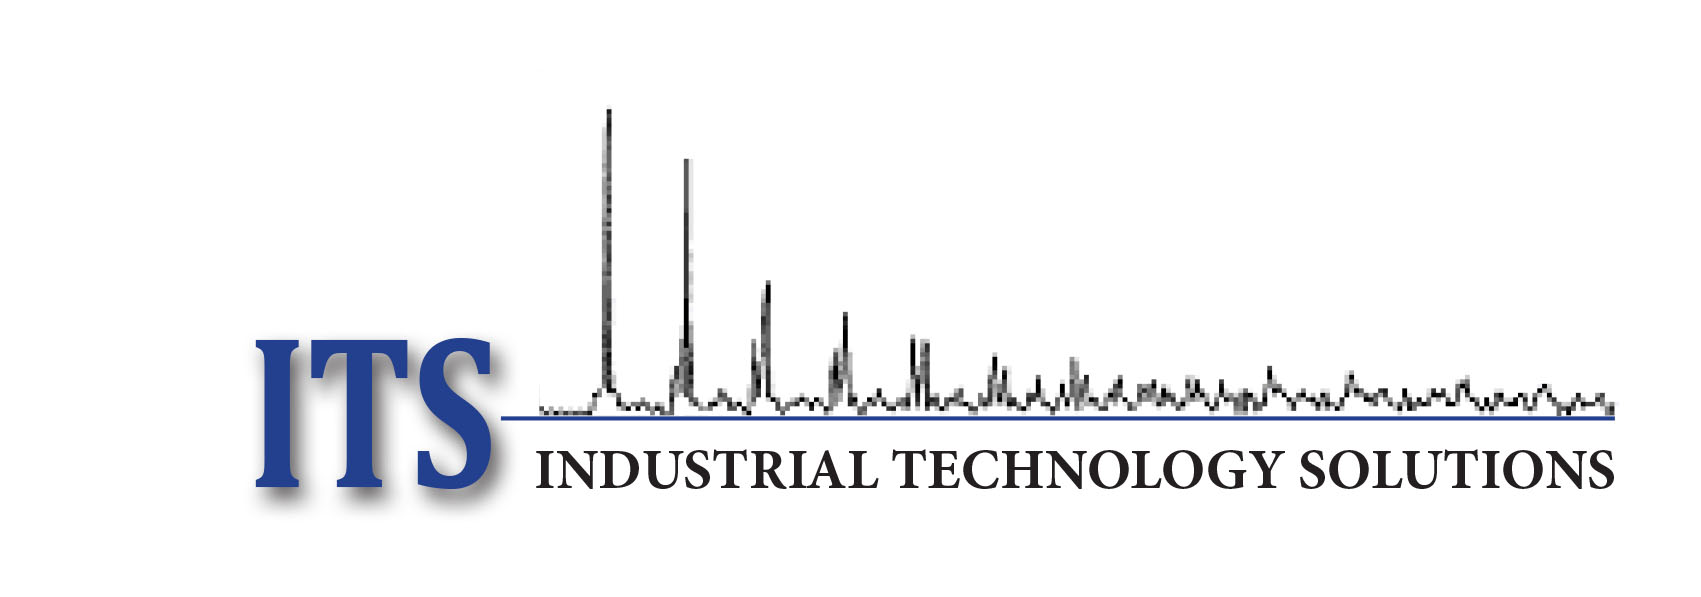 Industrial Technology Solutions (ITS) logotype